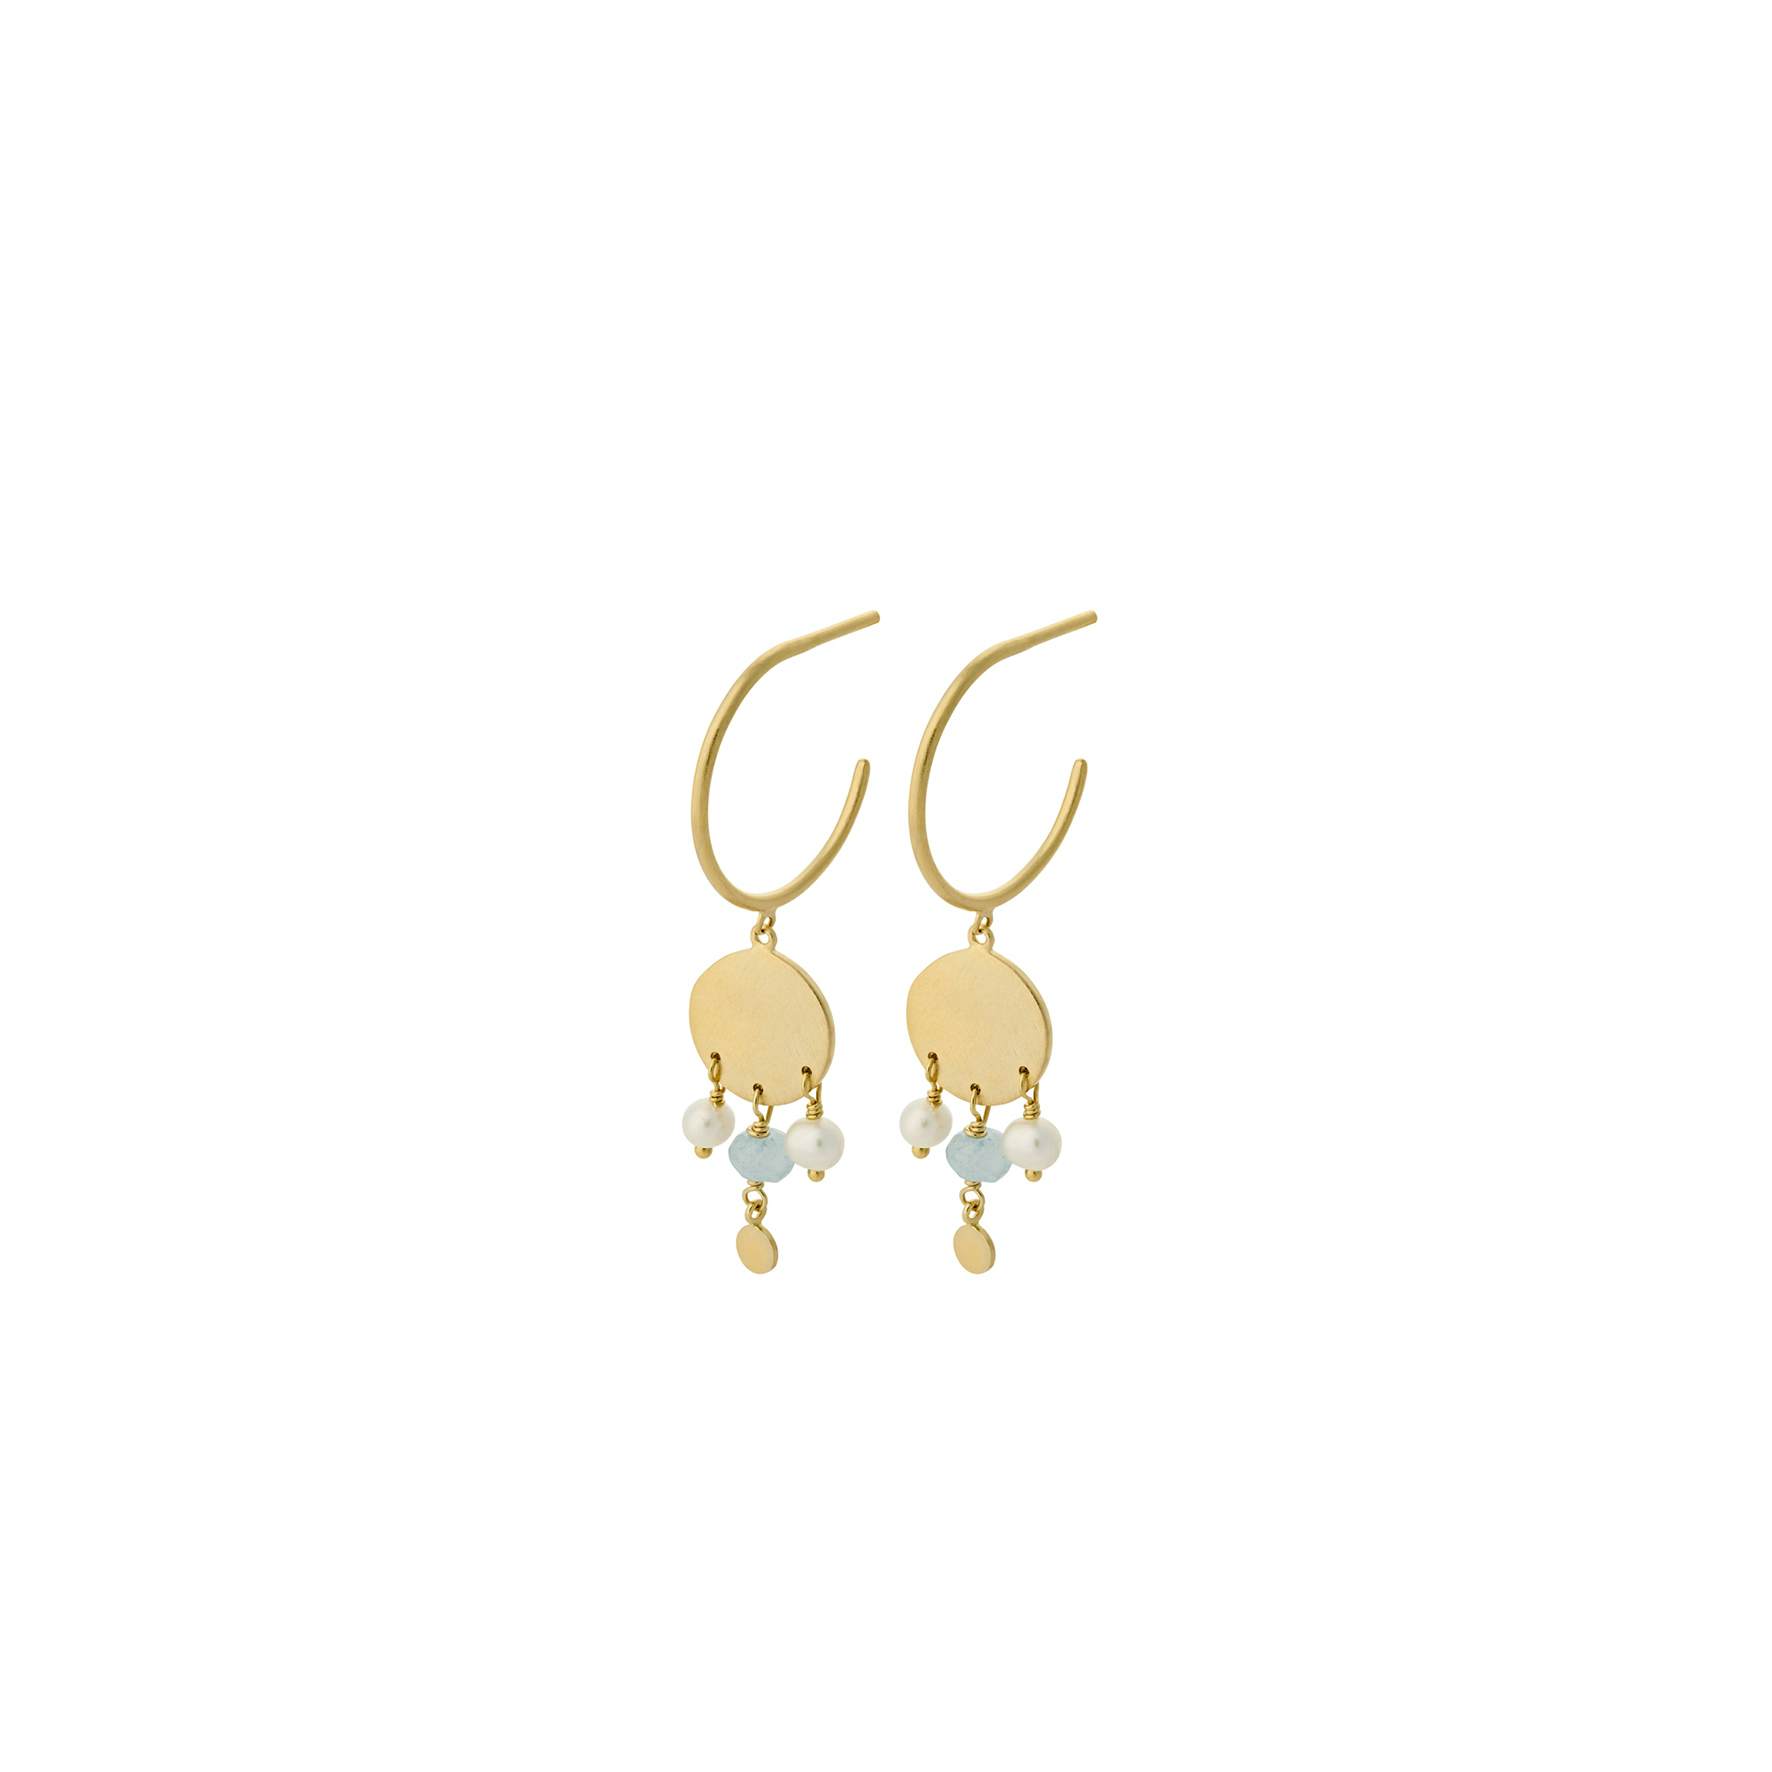 Dream Catcher Hoops from Pernille Corydon in Goldplated-Silver Sterling 925